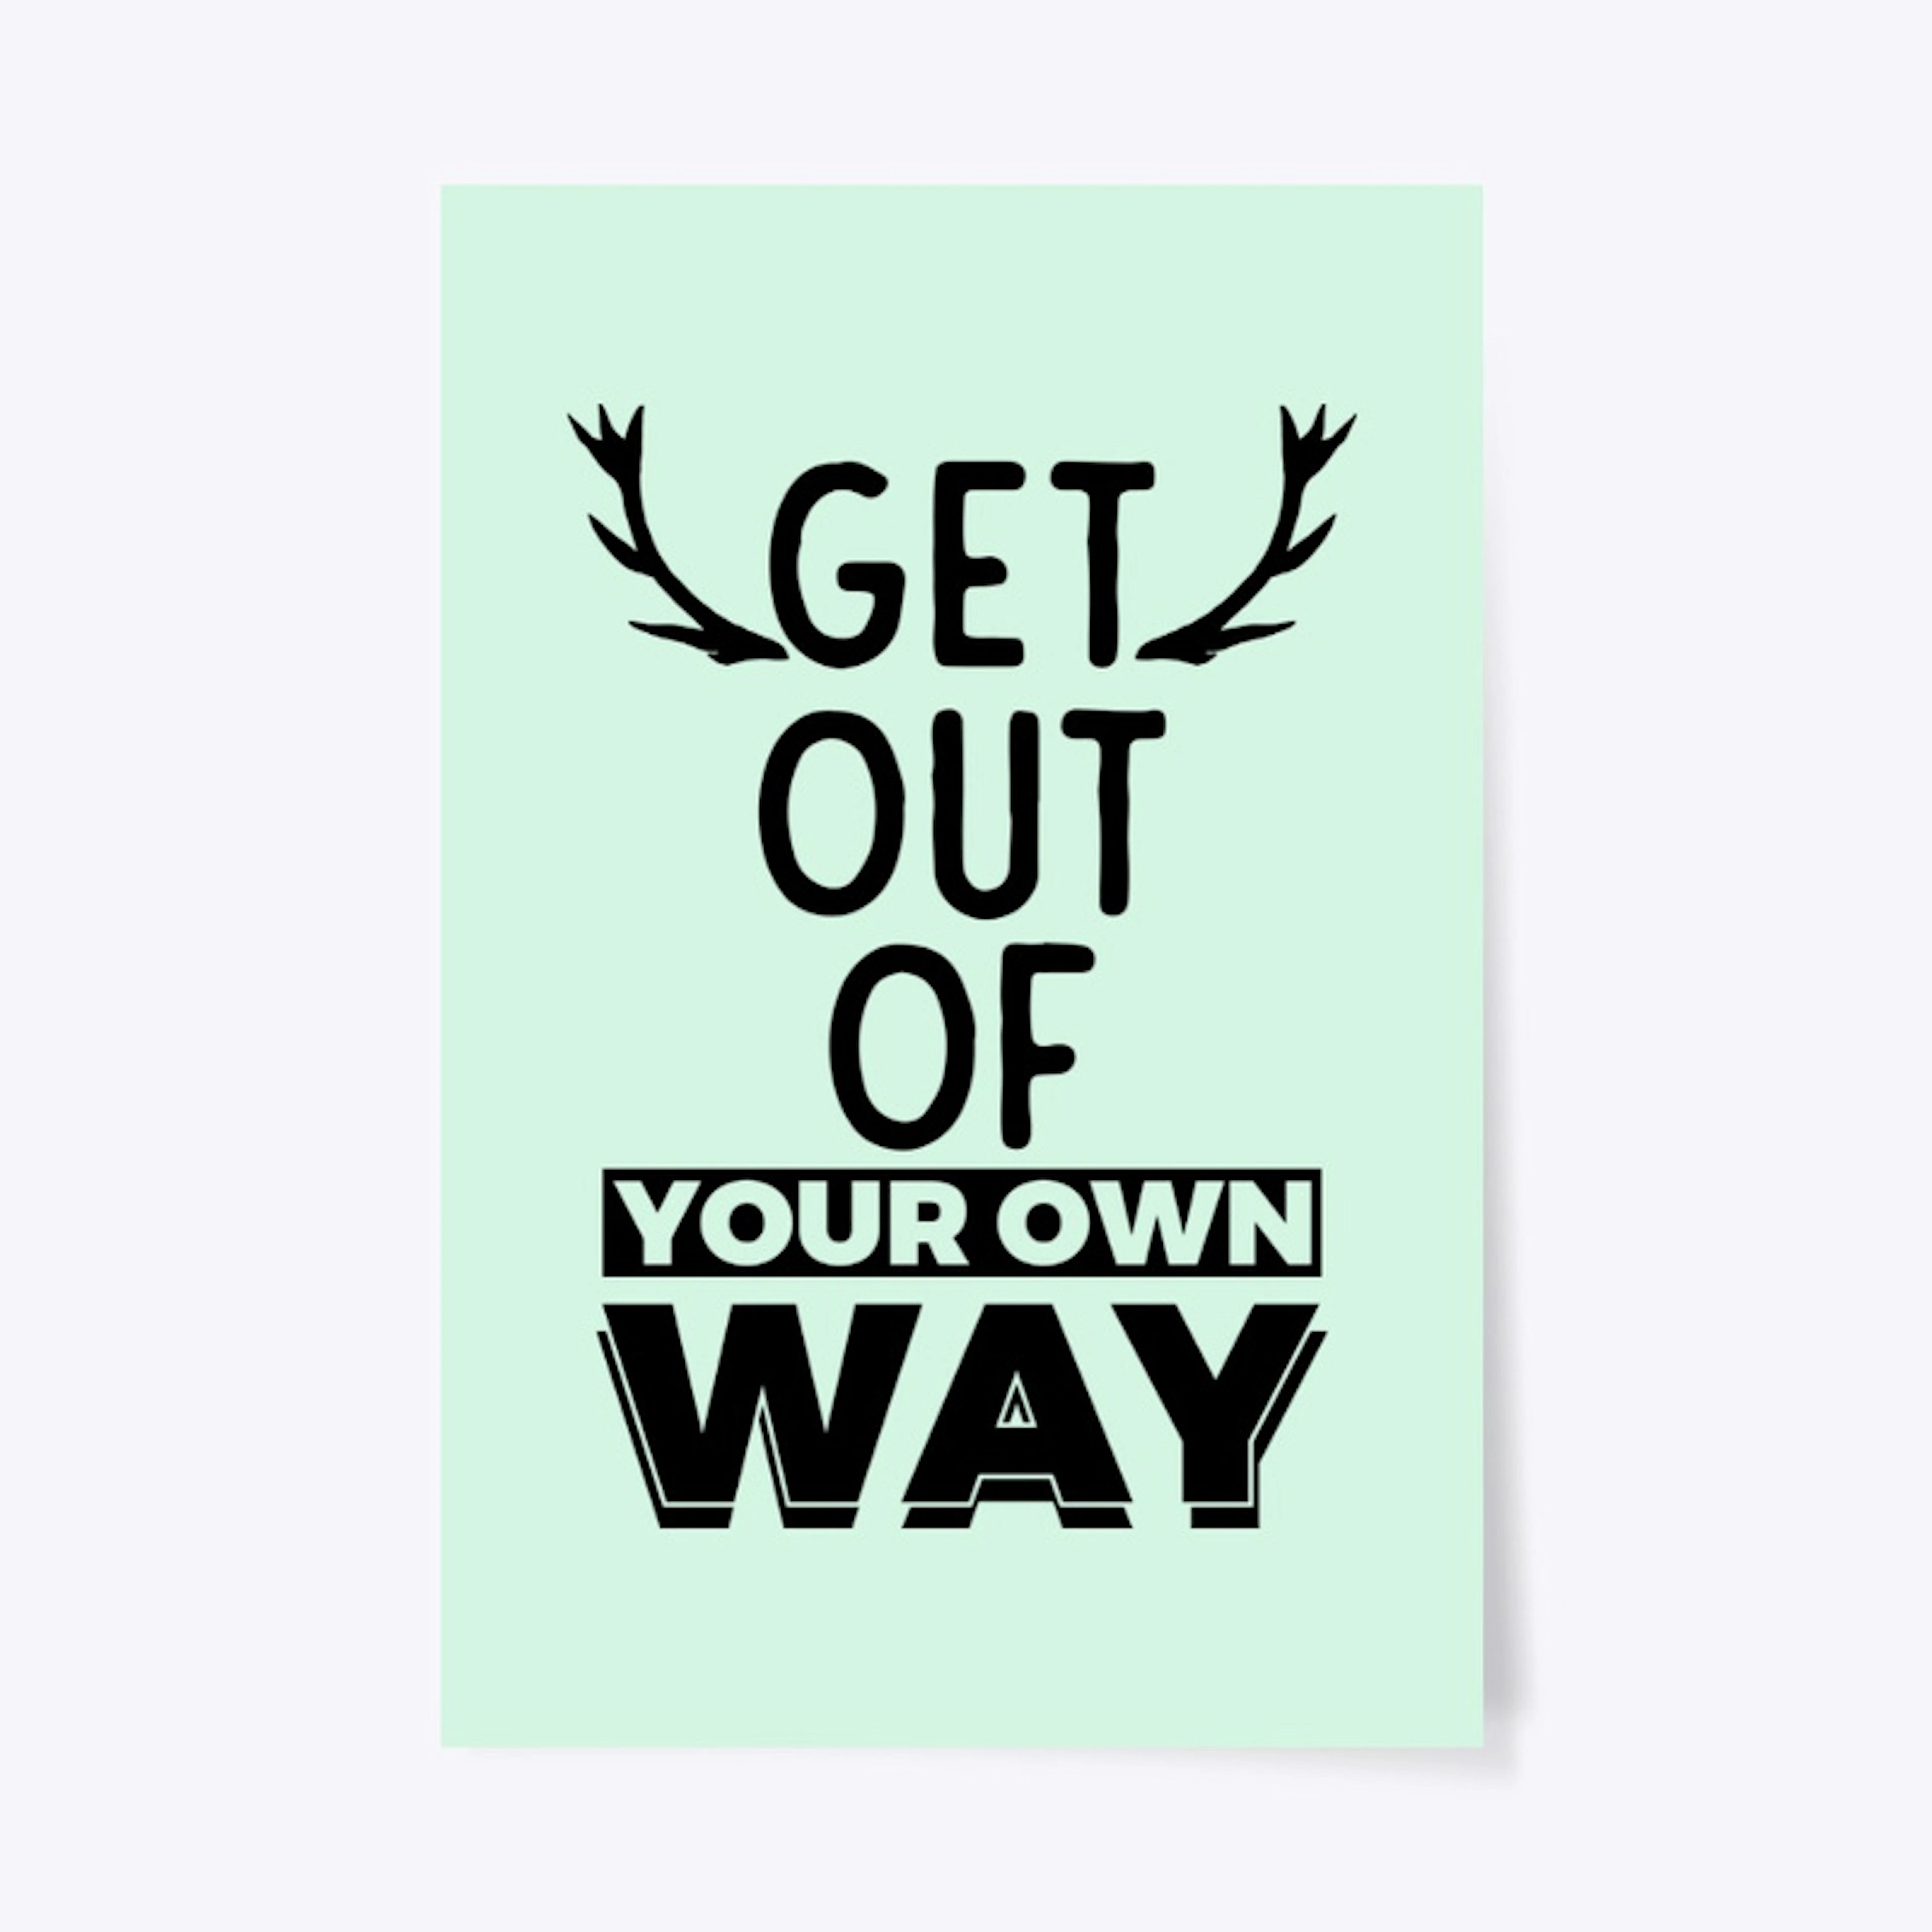 Get out of your own way